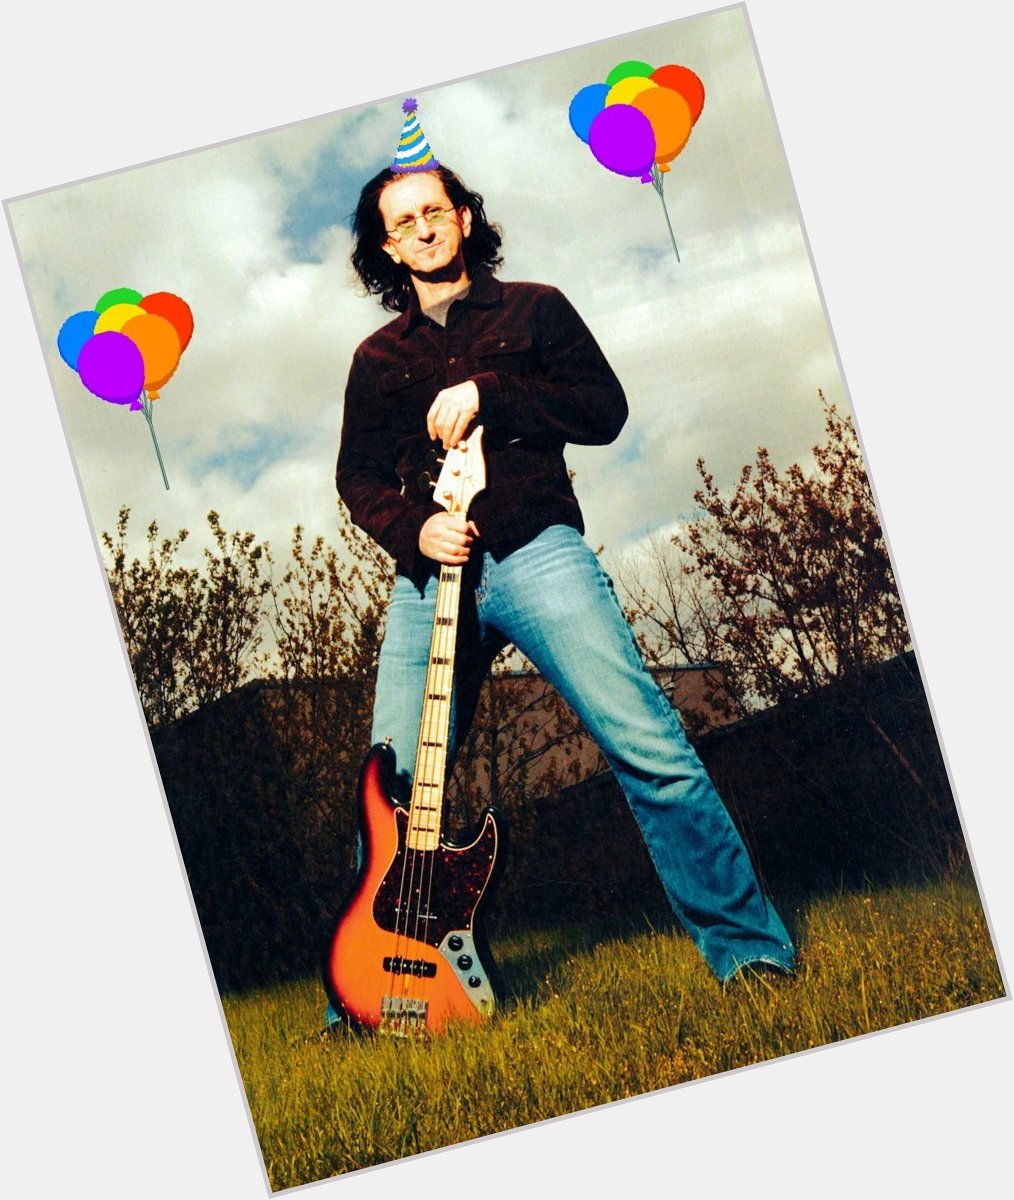 HAPPY 64TH BIRTHDAY TO THE ONE AND ONLY GEDDY LEE!!! 